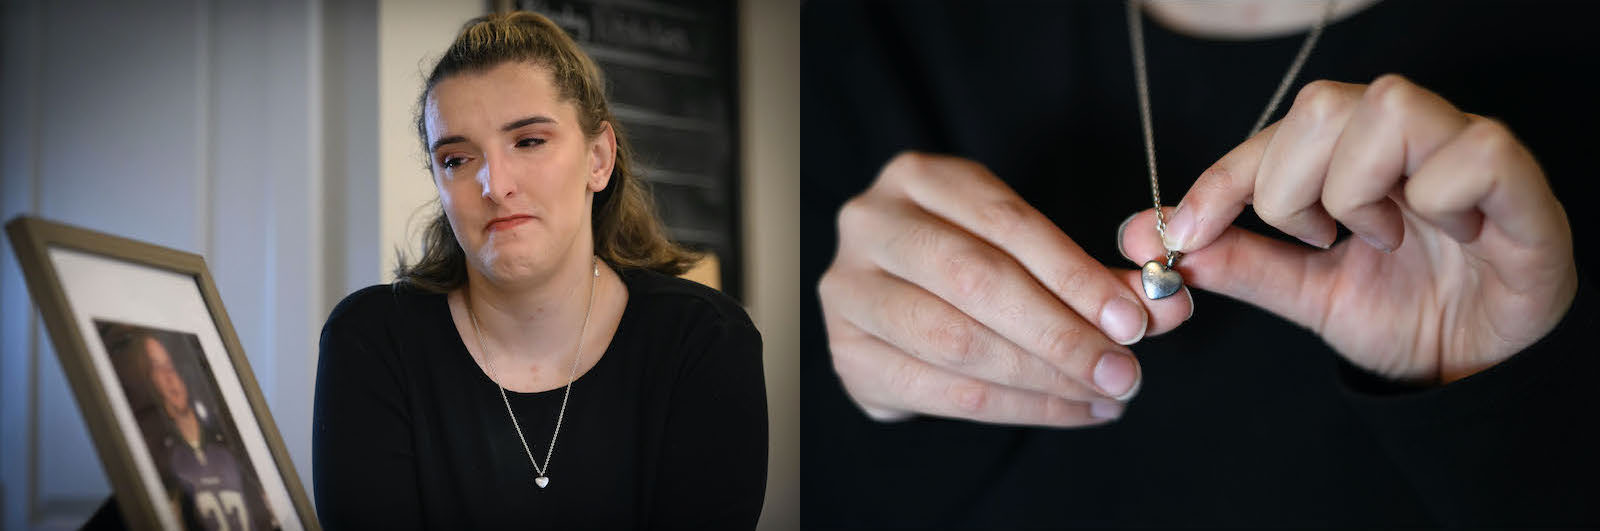 Two photos side by side. On the left, a light-skinned woman with tied-back brown hair wearing a black shirt appears on the edge of tears. On the right, hands hold a small silver heart-shaped locket on a chain.